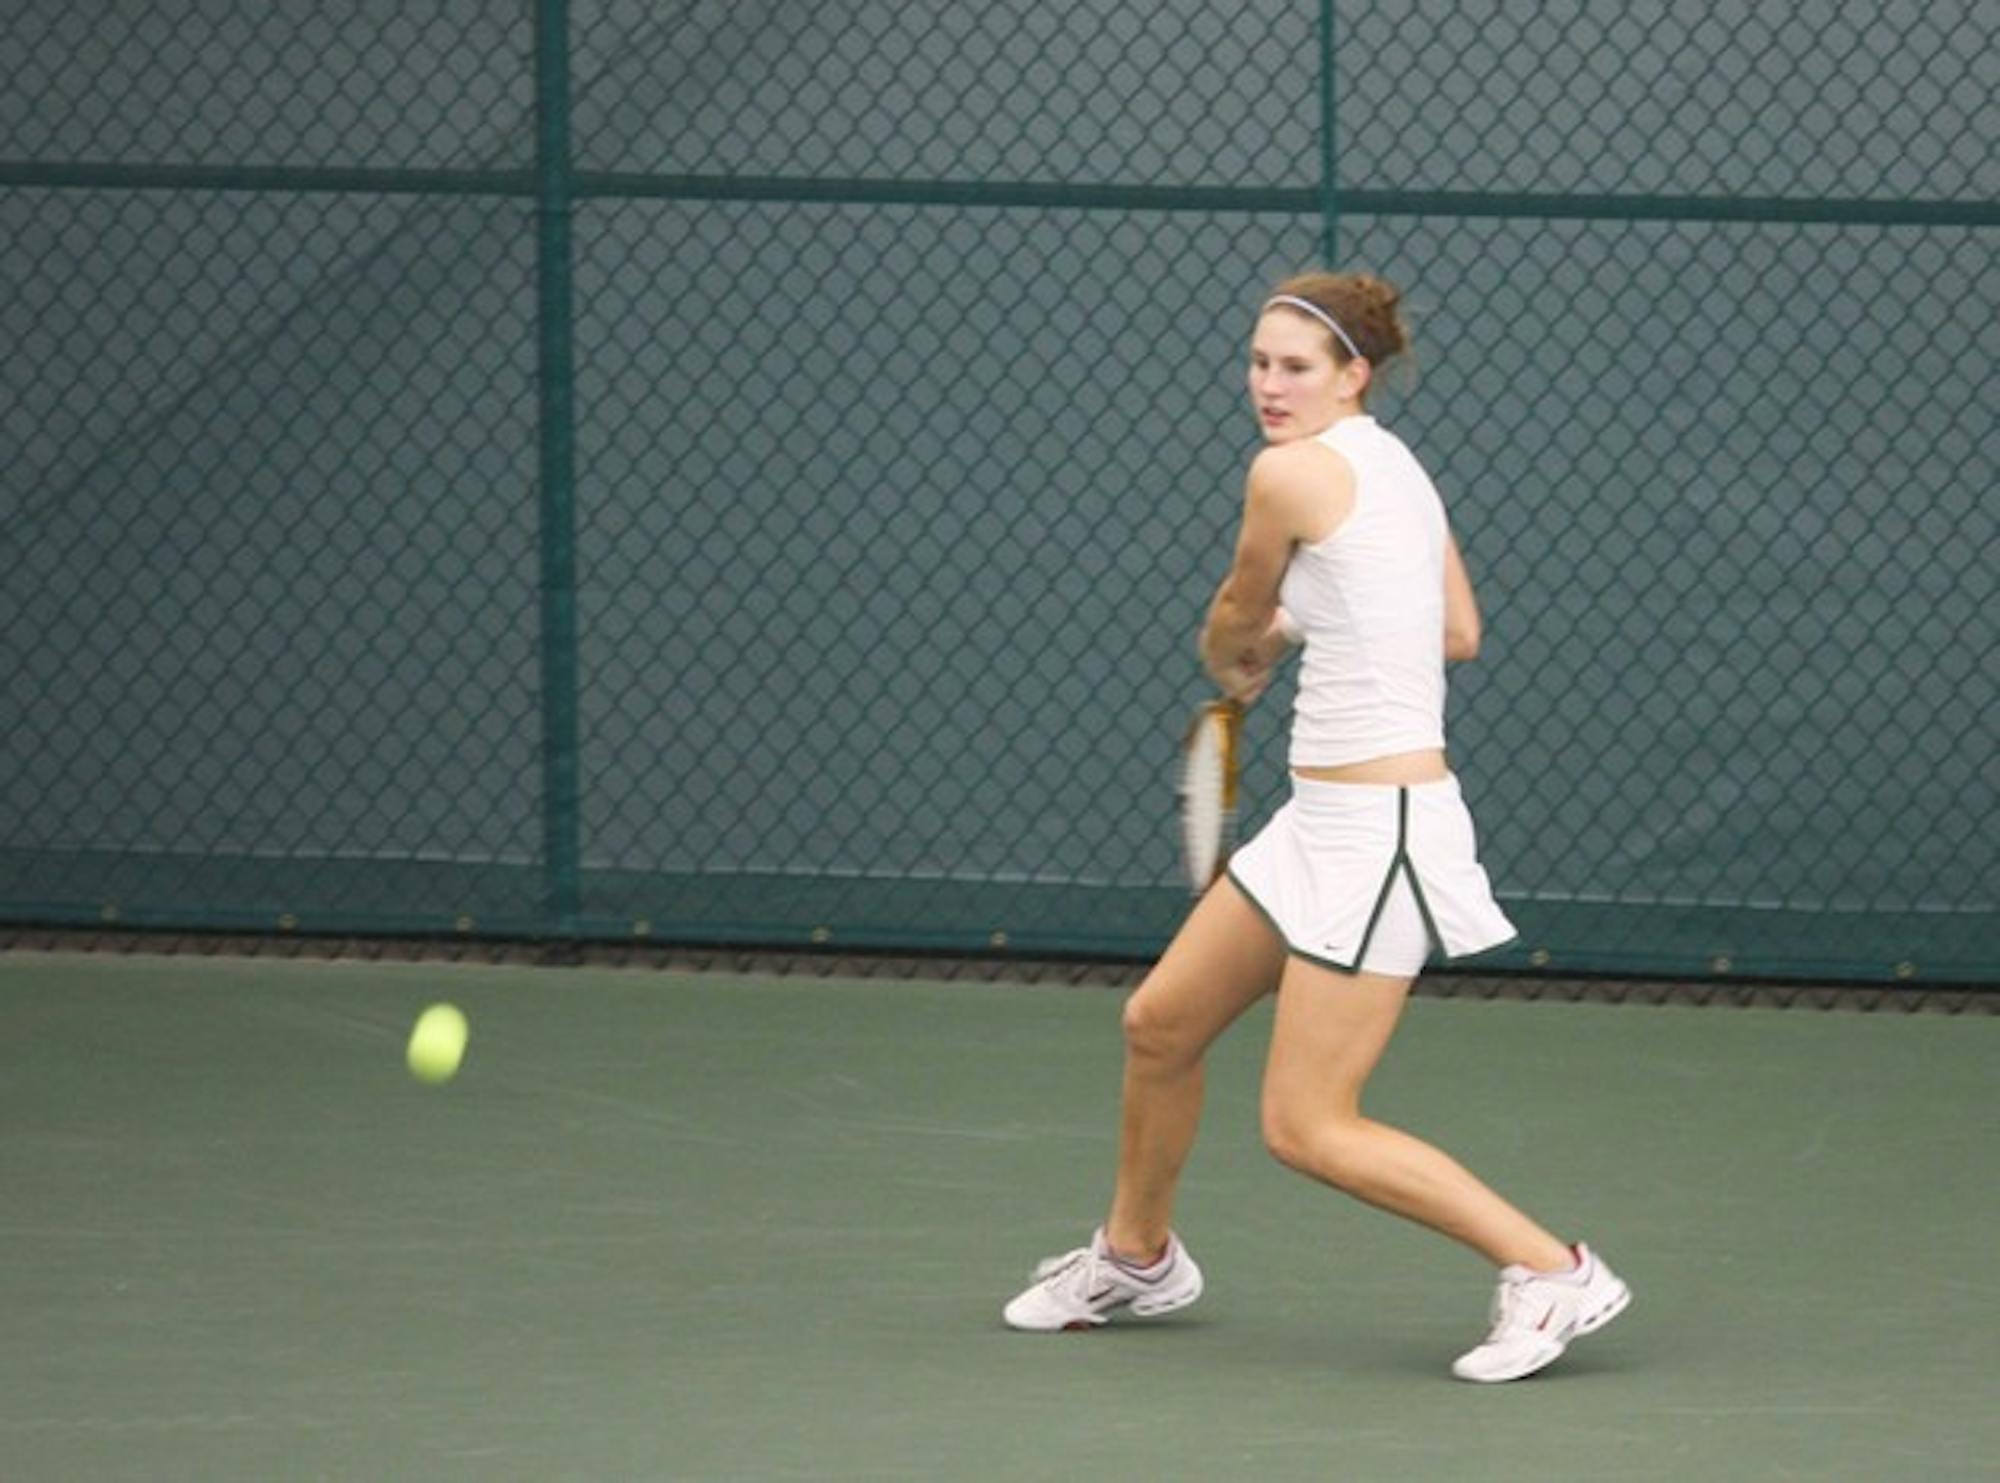 Carissa King '12 went 2-1 in singles matches including a 1-6, 6-0, 10-7 comeback victory in her first match.